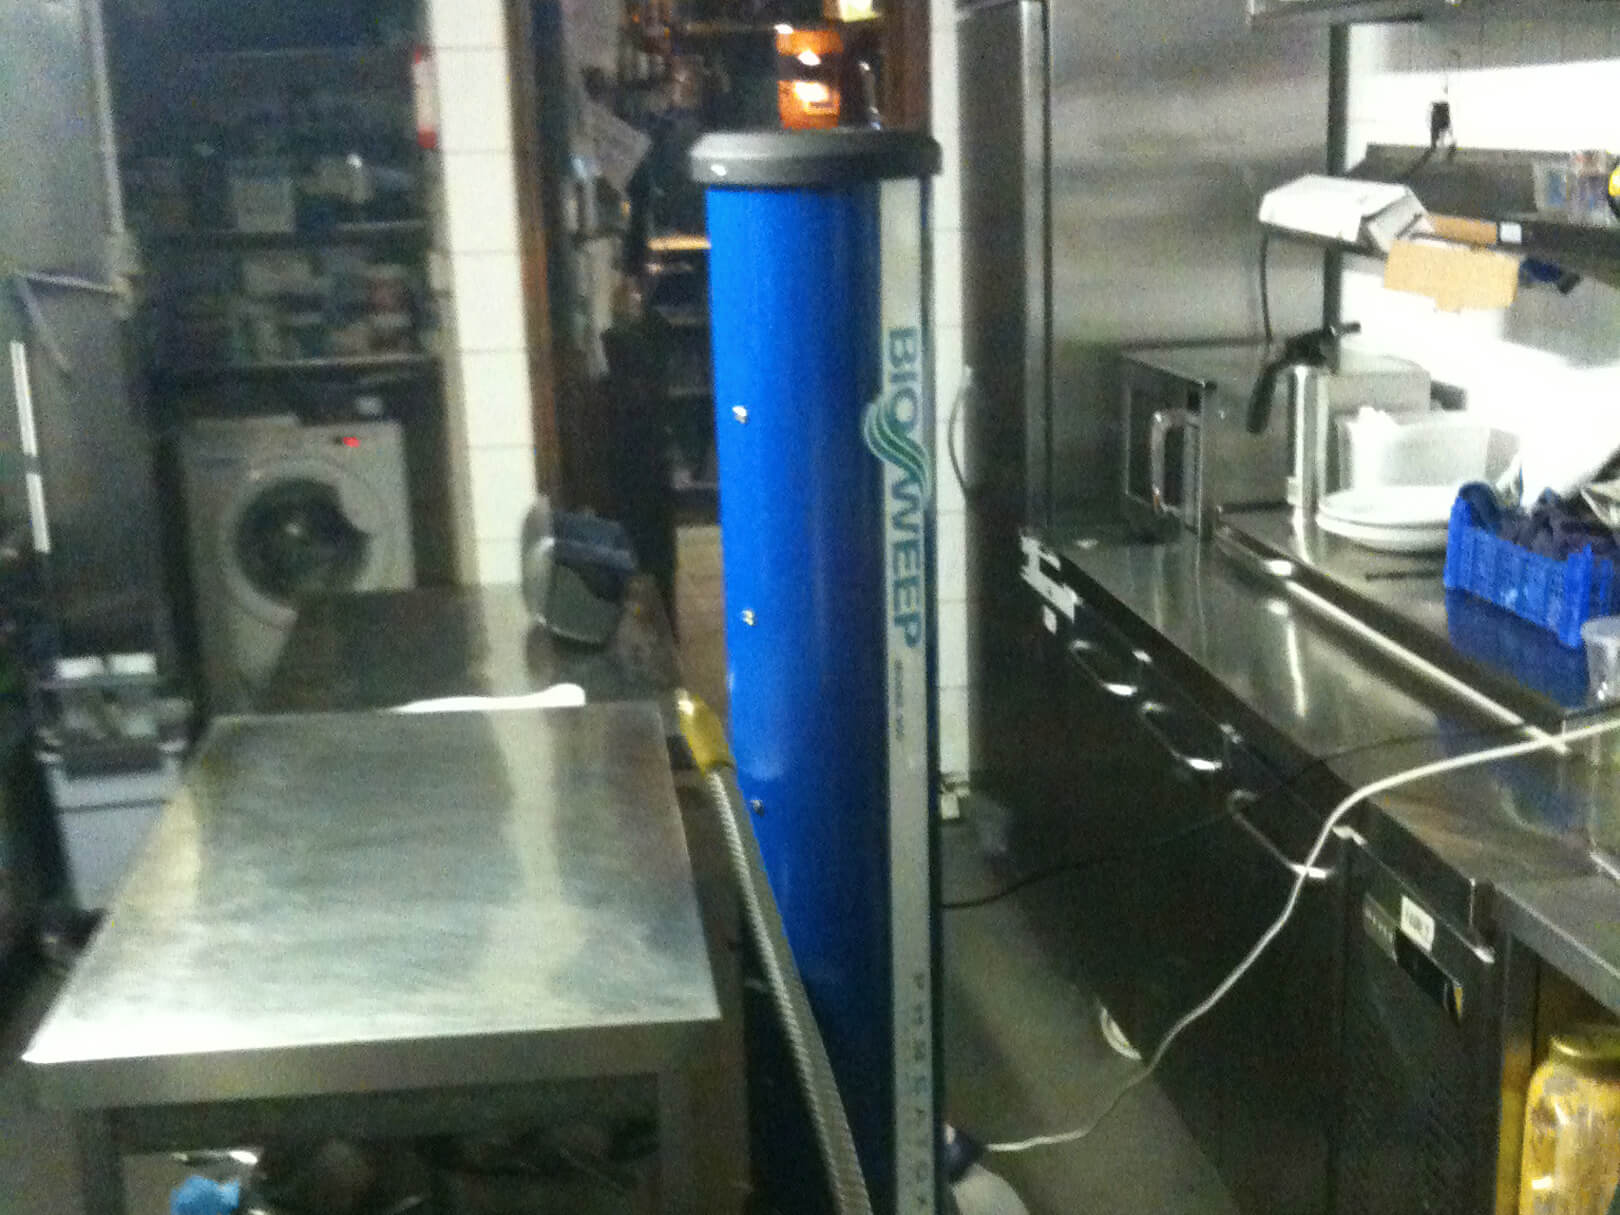 BioSweep ozone treatment inside commercial kitchen